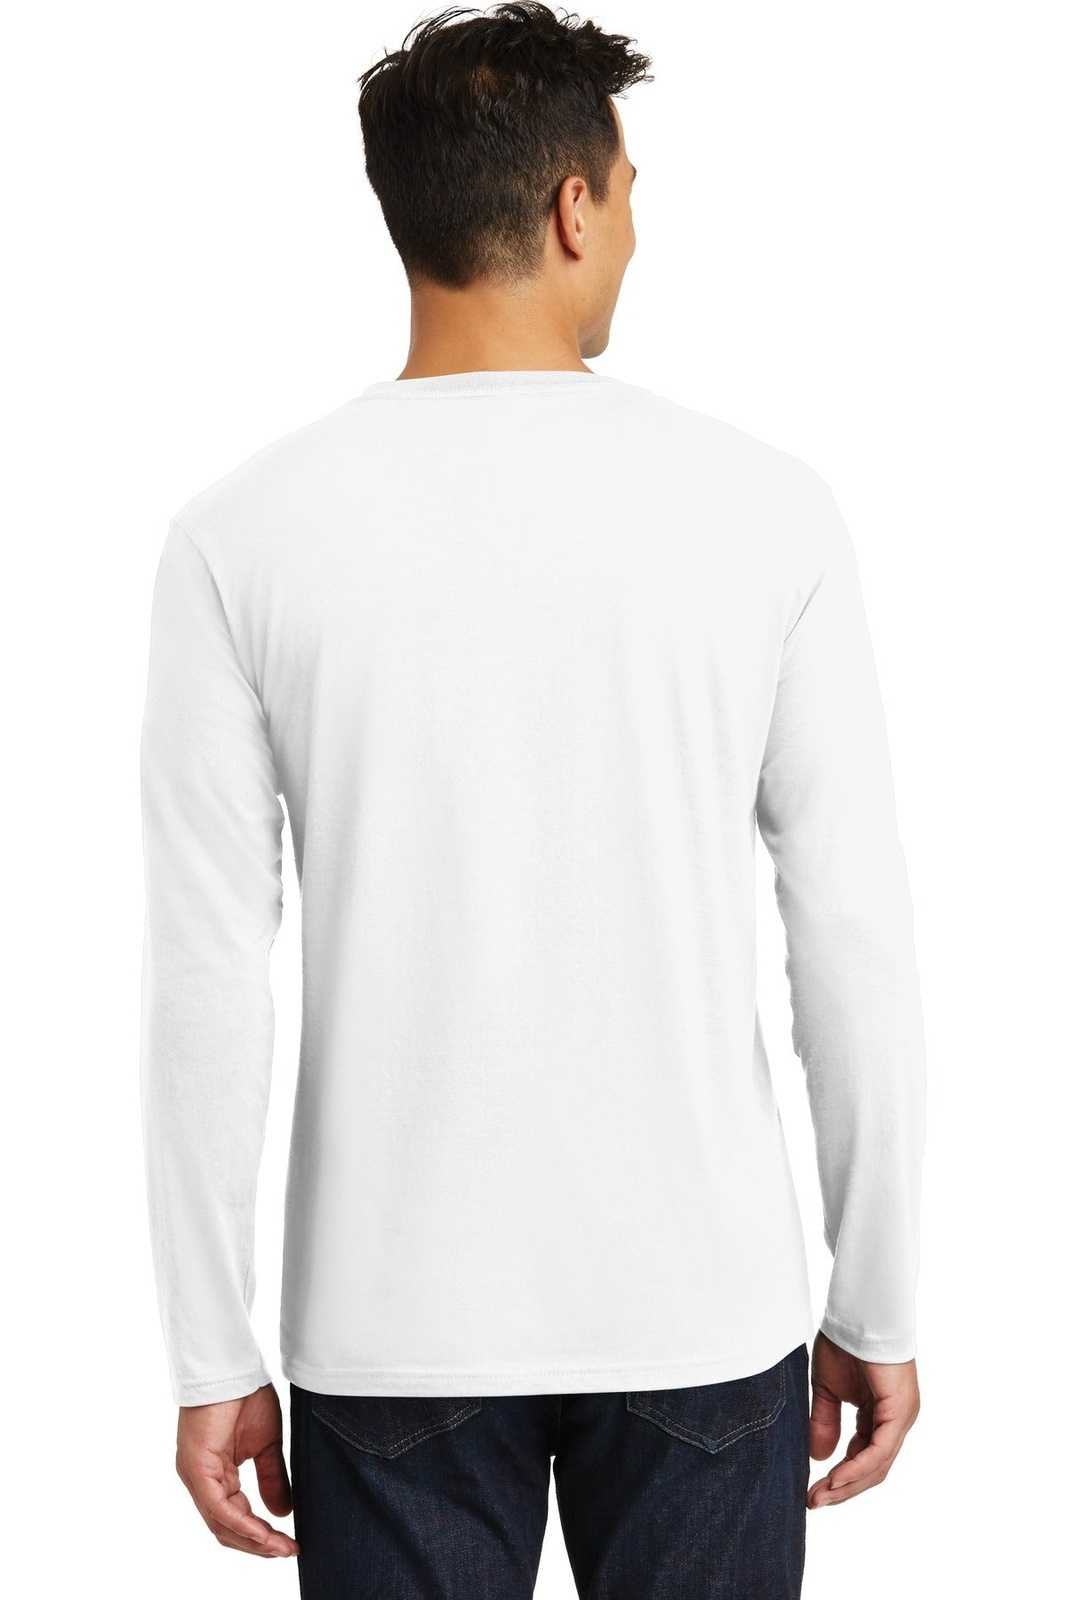 District DT105 Perfect Weight Long Sleeve Tee - Bright White - HIT a Double - 2